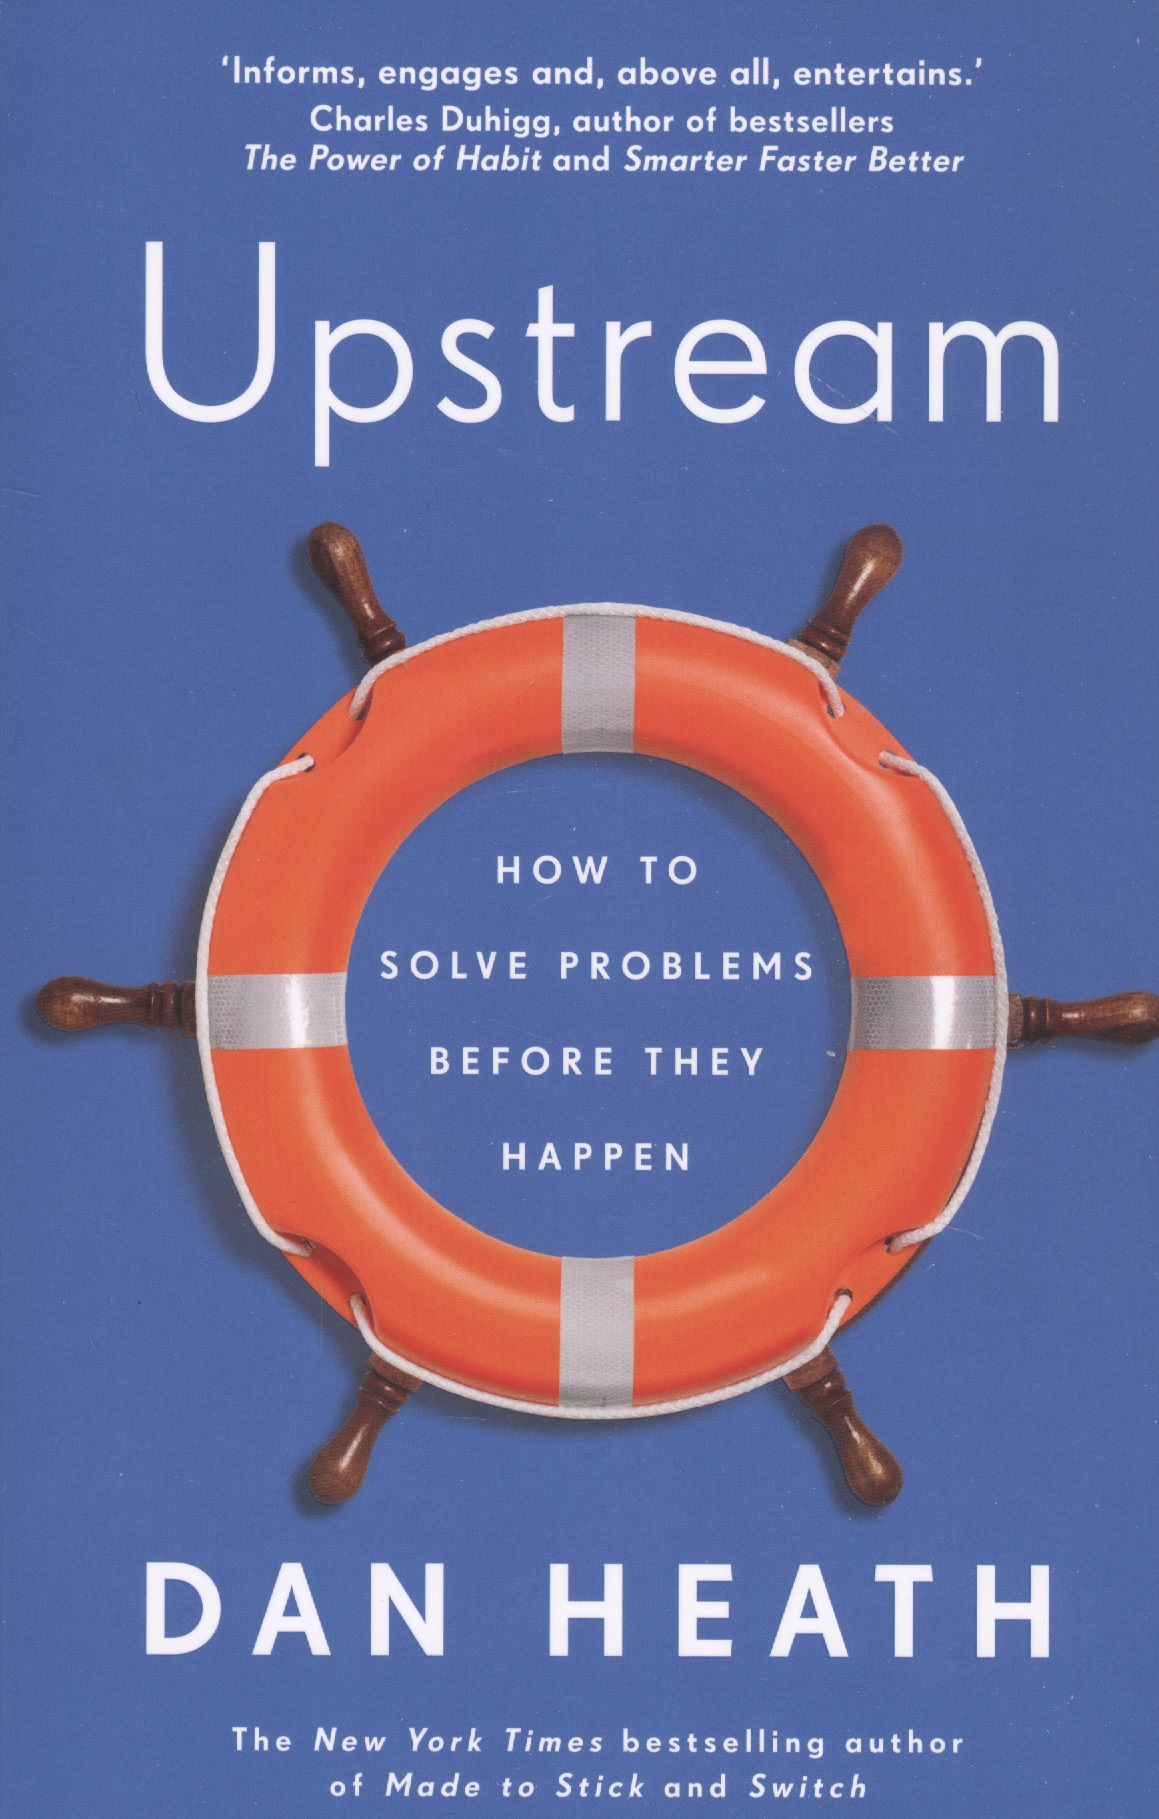 UPSTREAM van tulleken chris ultra processed people why do we all eat stuff that isn’t food … and why can’t we stop